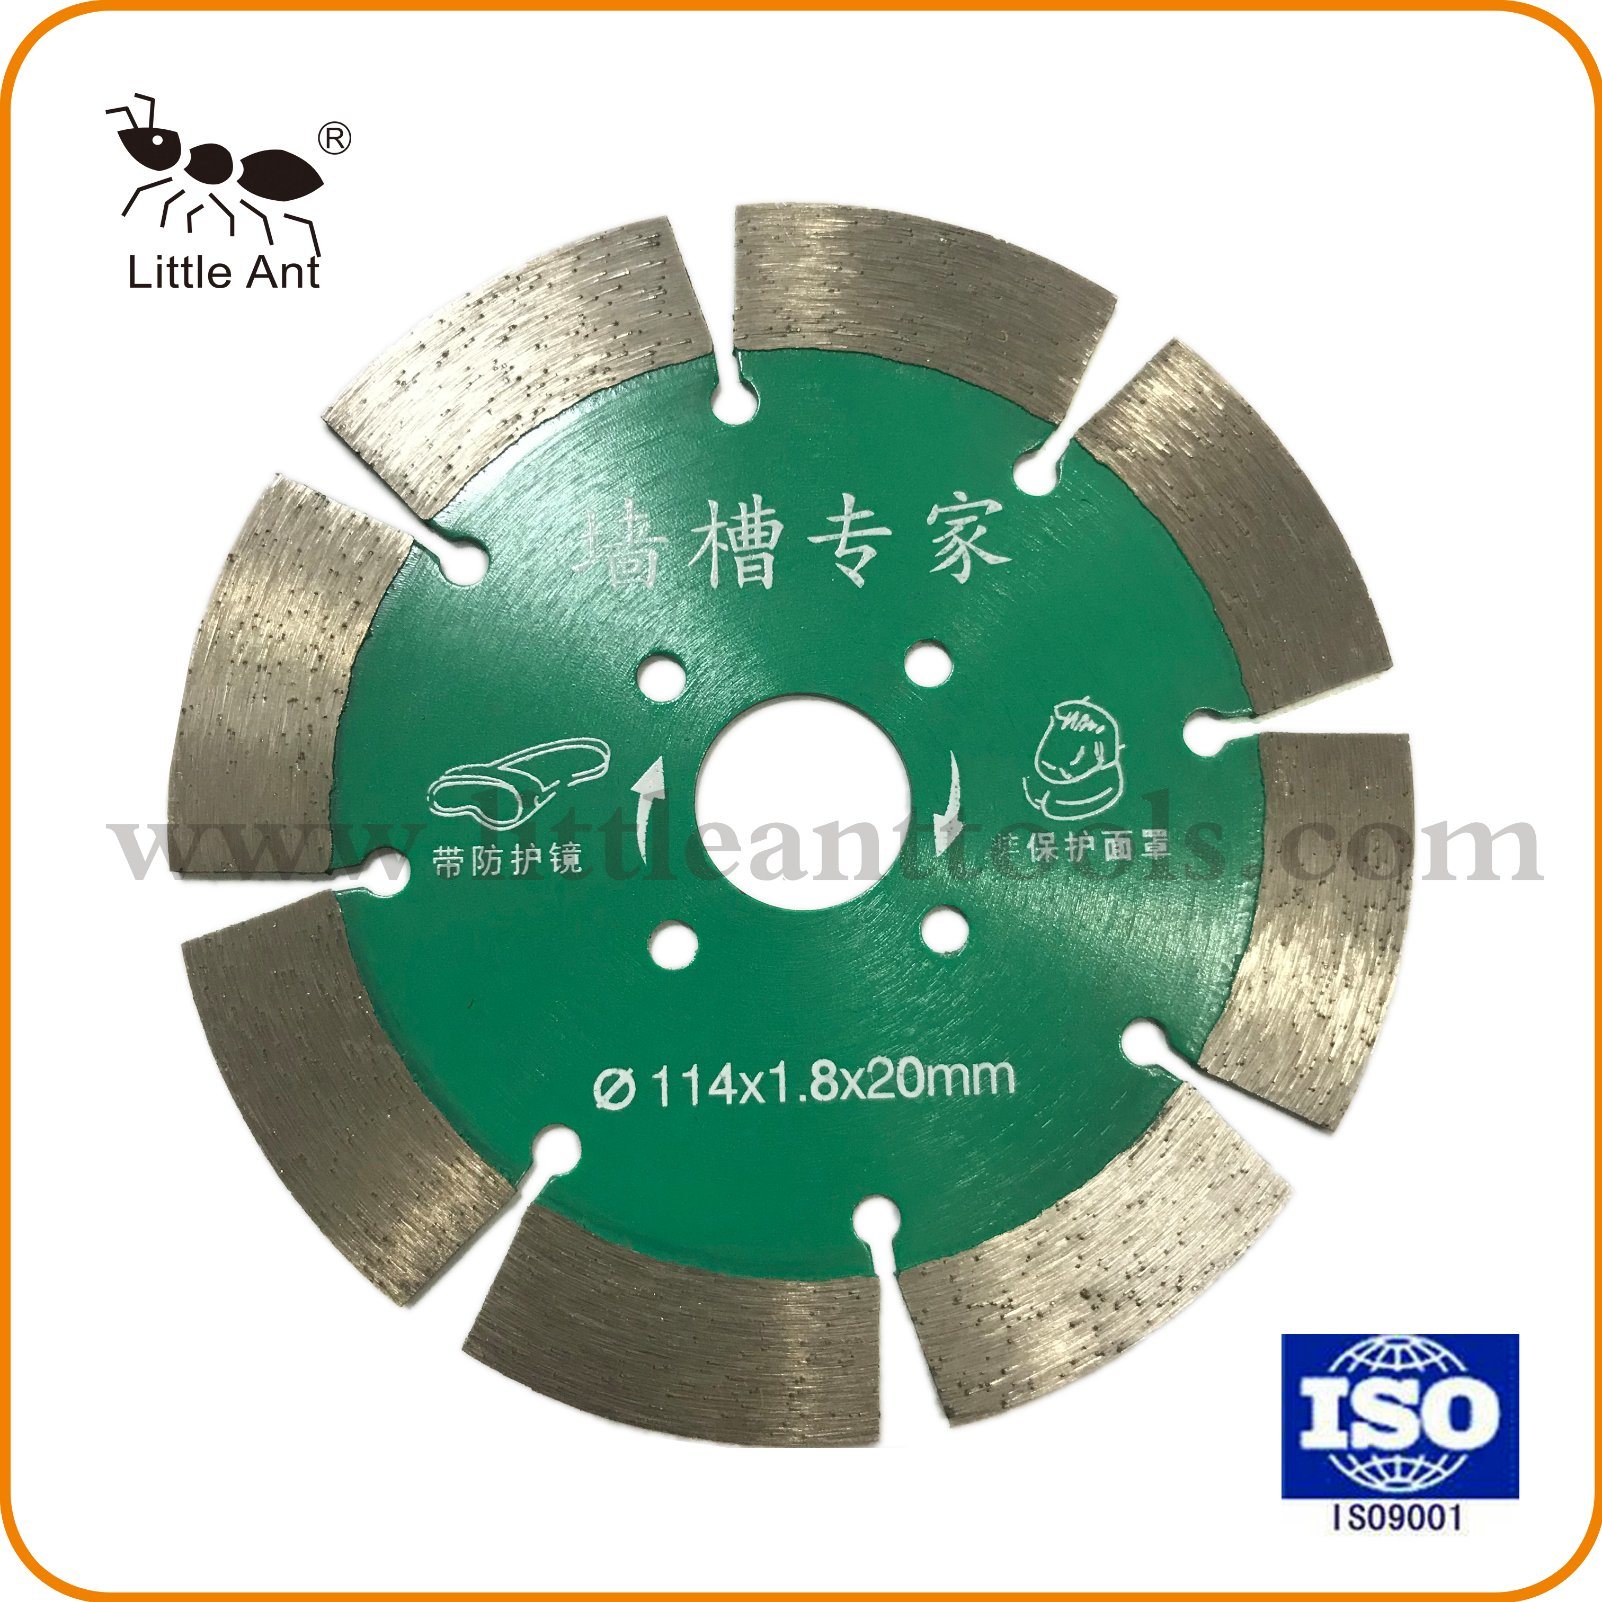 114mm Dry Diamond Tool Cutting Disc Saw Blade for Cutting Concrete